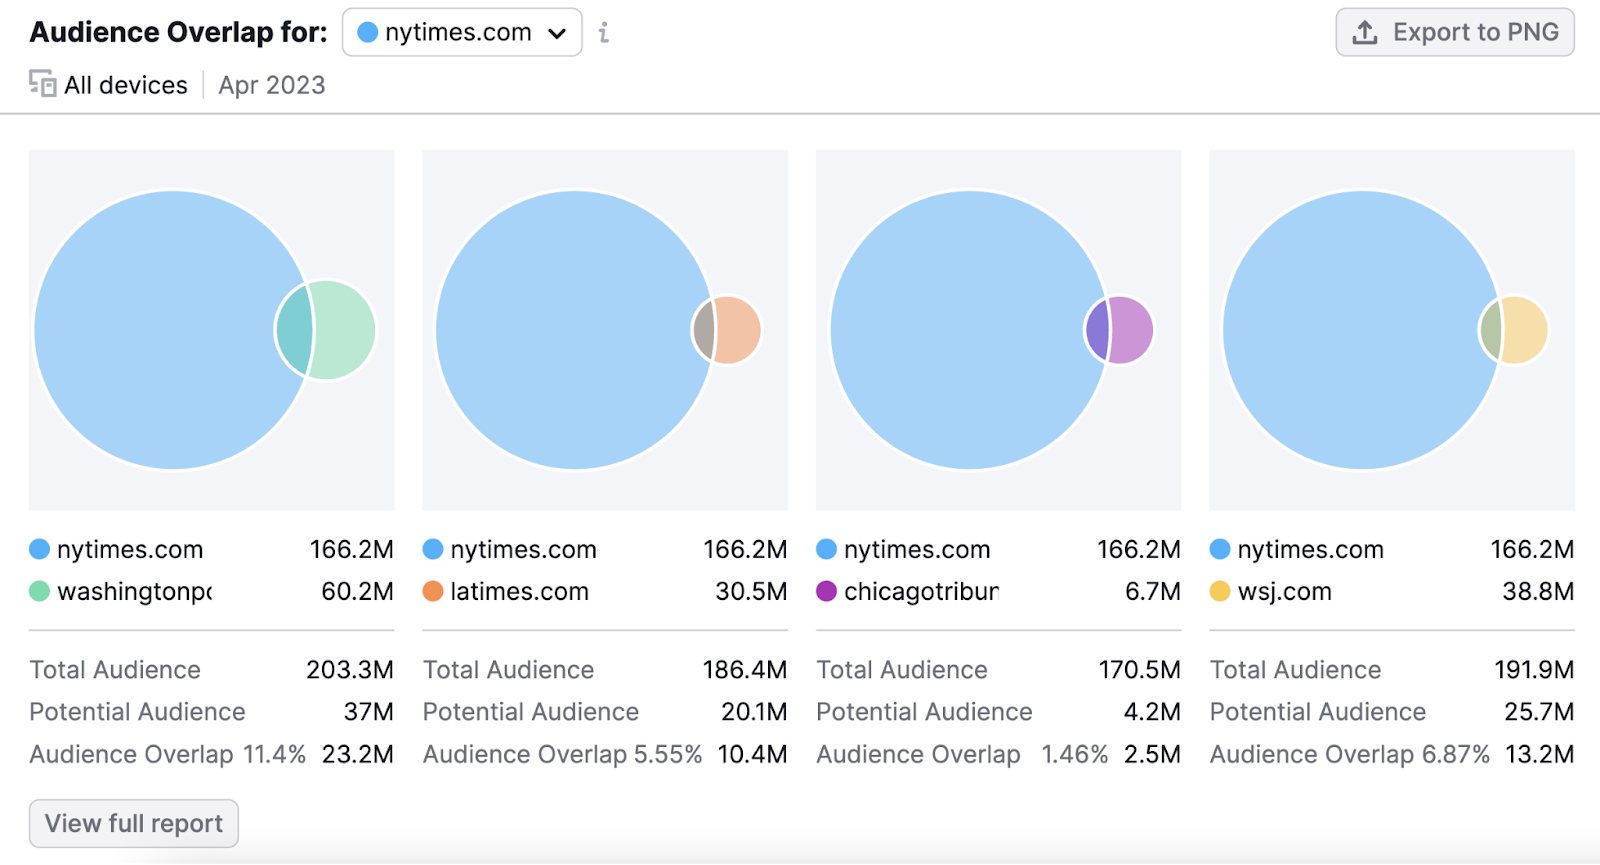 "Audience Overlap for: nytimes.com" tab